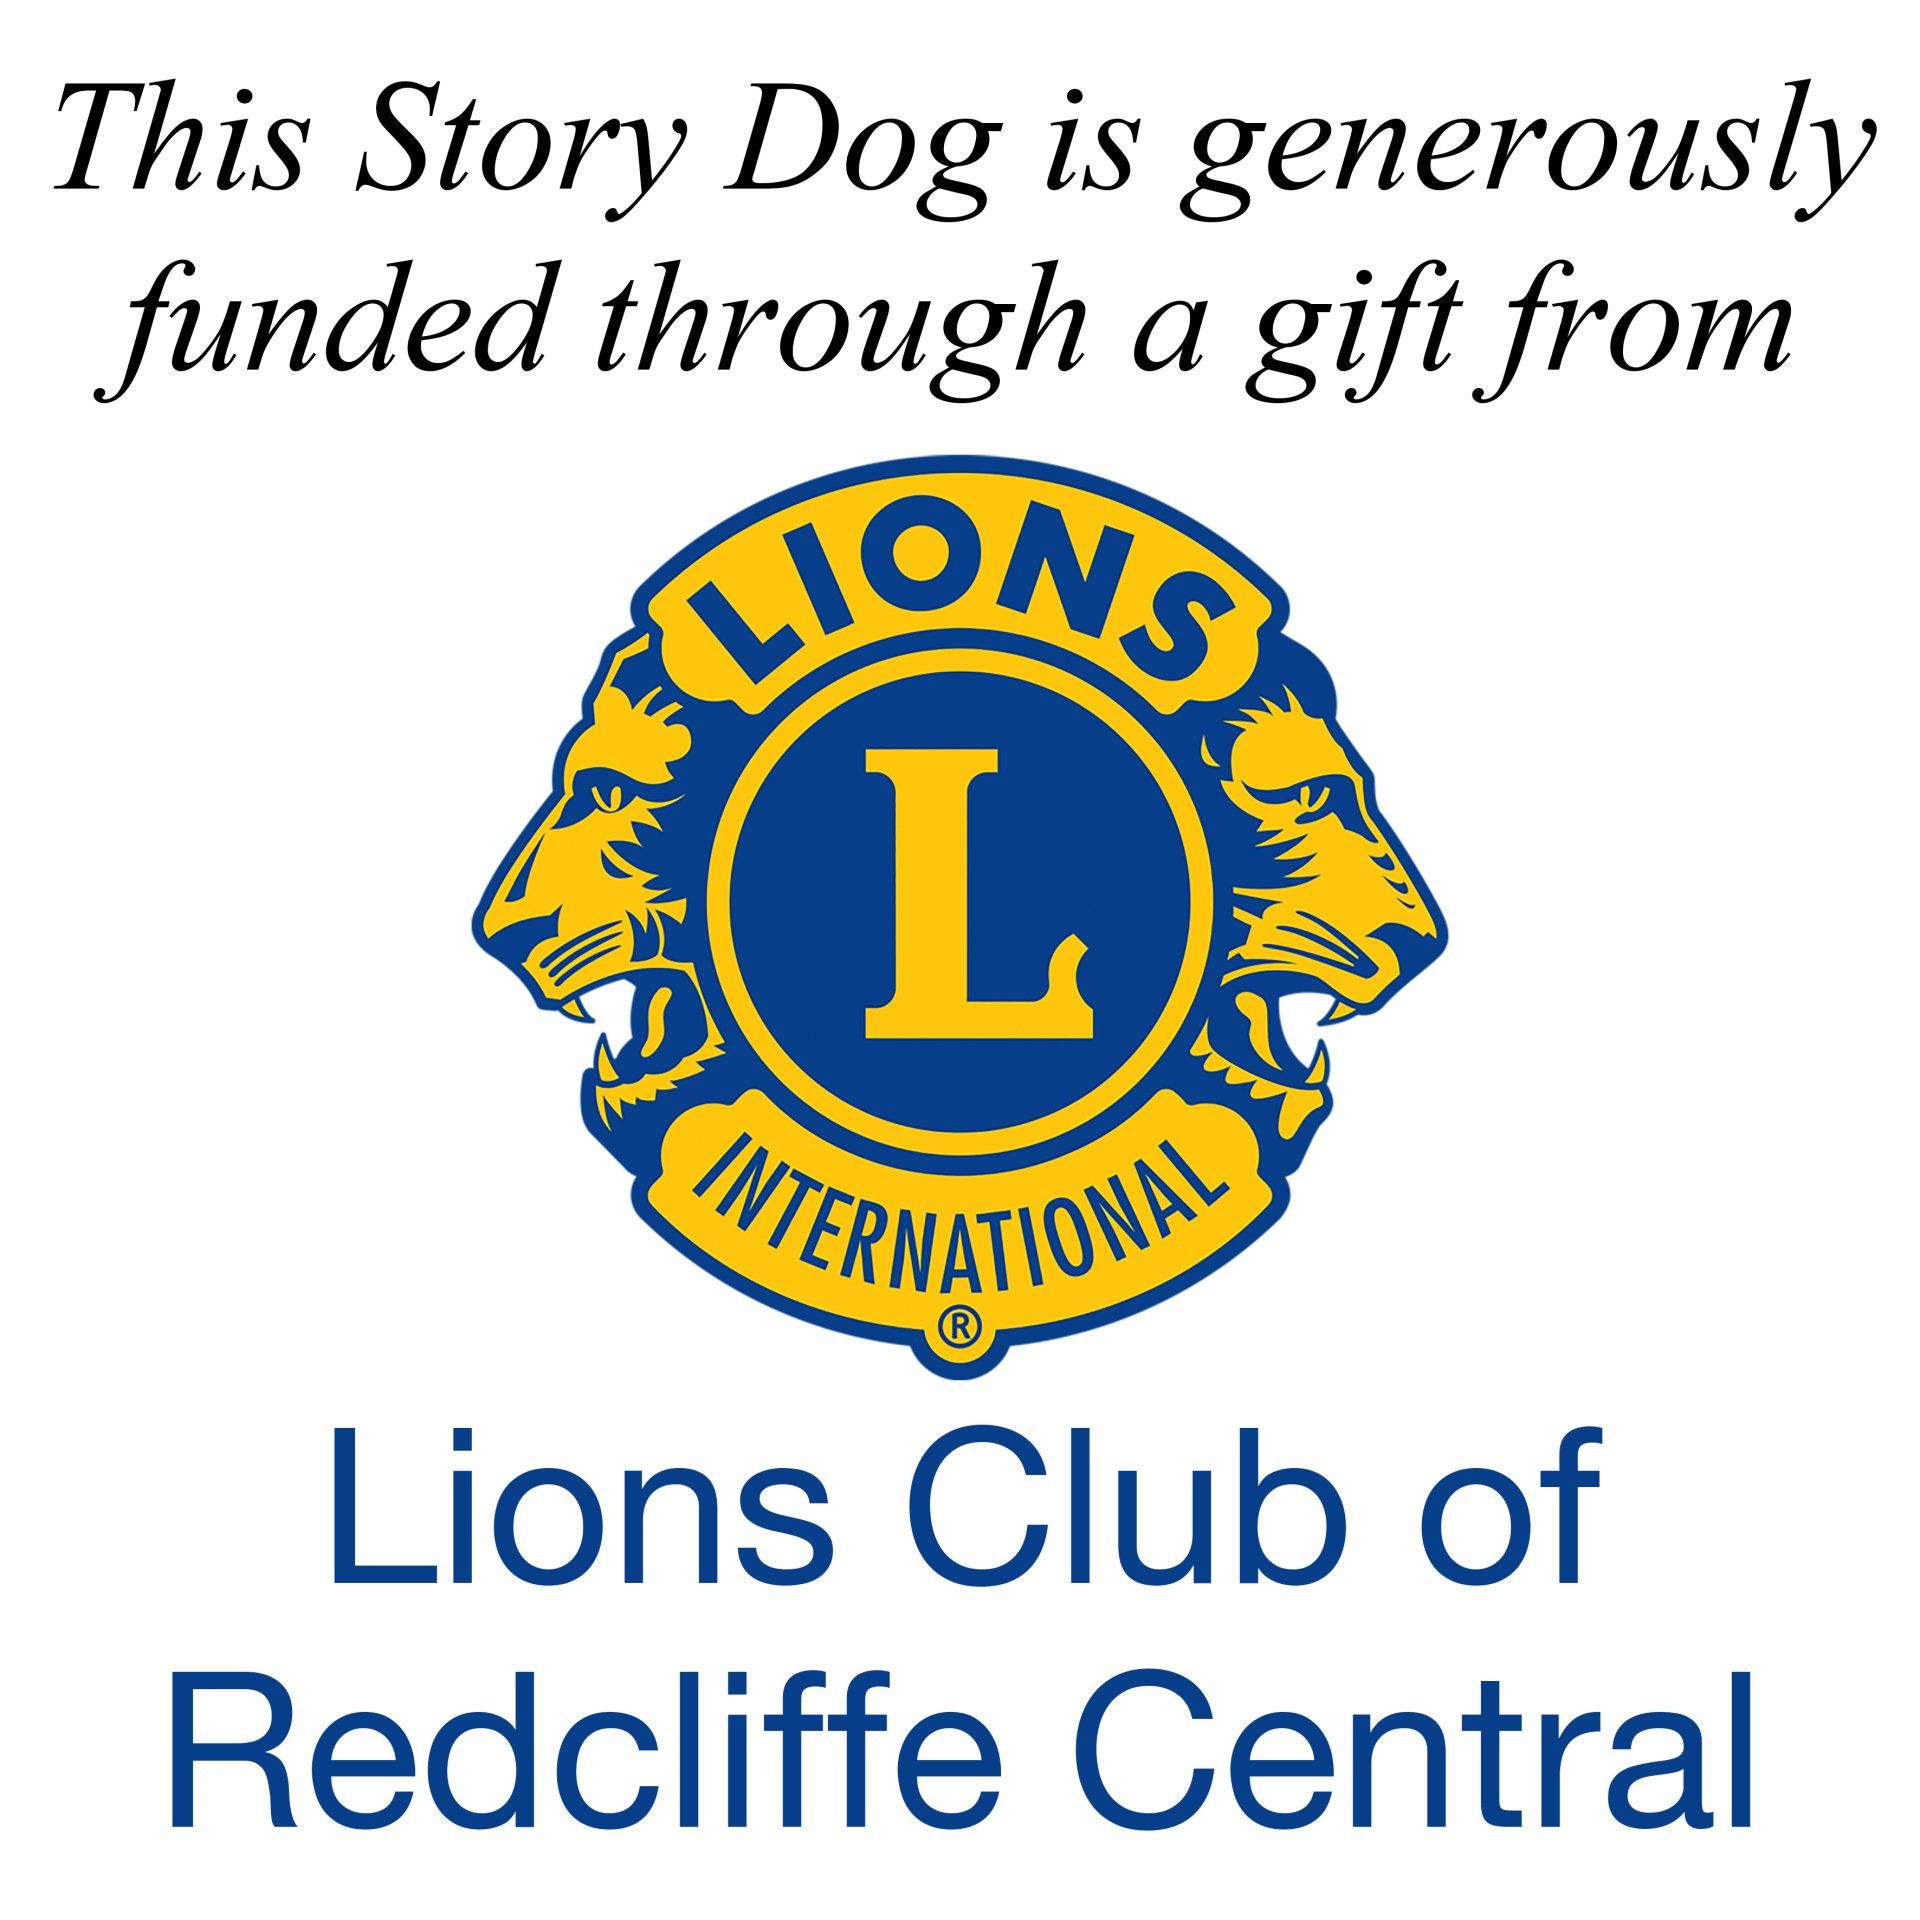 Lions Club of Redcliffe Central